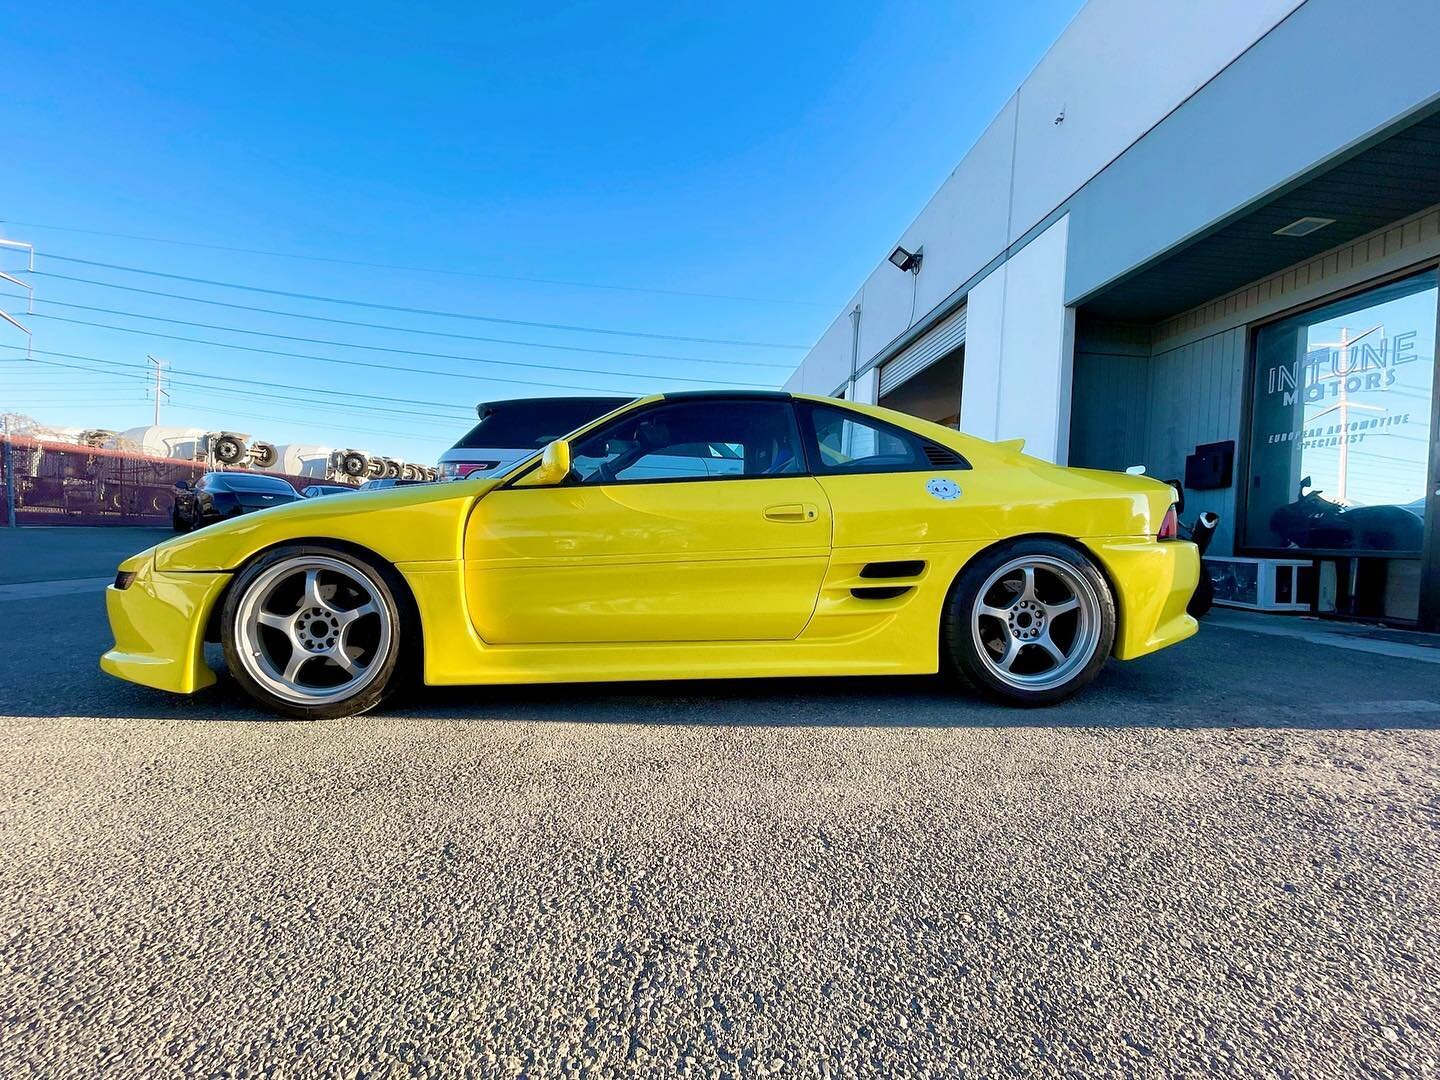 Absolutely in love with our customer&rsquo;s car! 
1993 Toyota MR2 2.0l Turbo. Stay Intune for our blog feature on this vehicle 😍👀🏎💨
.
.
.
.
#toyota #mr2 #mr2turbo #toyotamr2 #turbo #sw20 #sw20mr2 #jdm #classic #93tilinfinity #sparco #jdmnation #